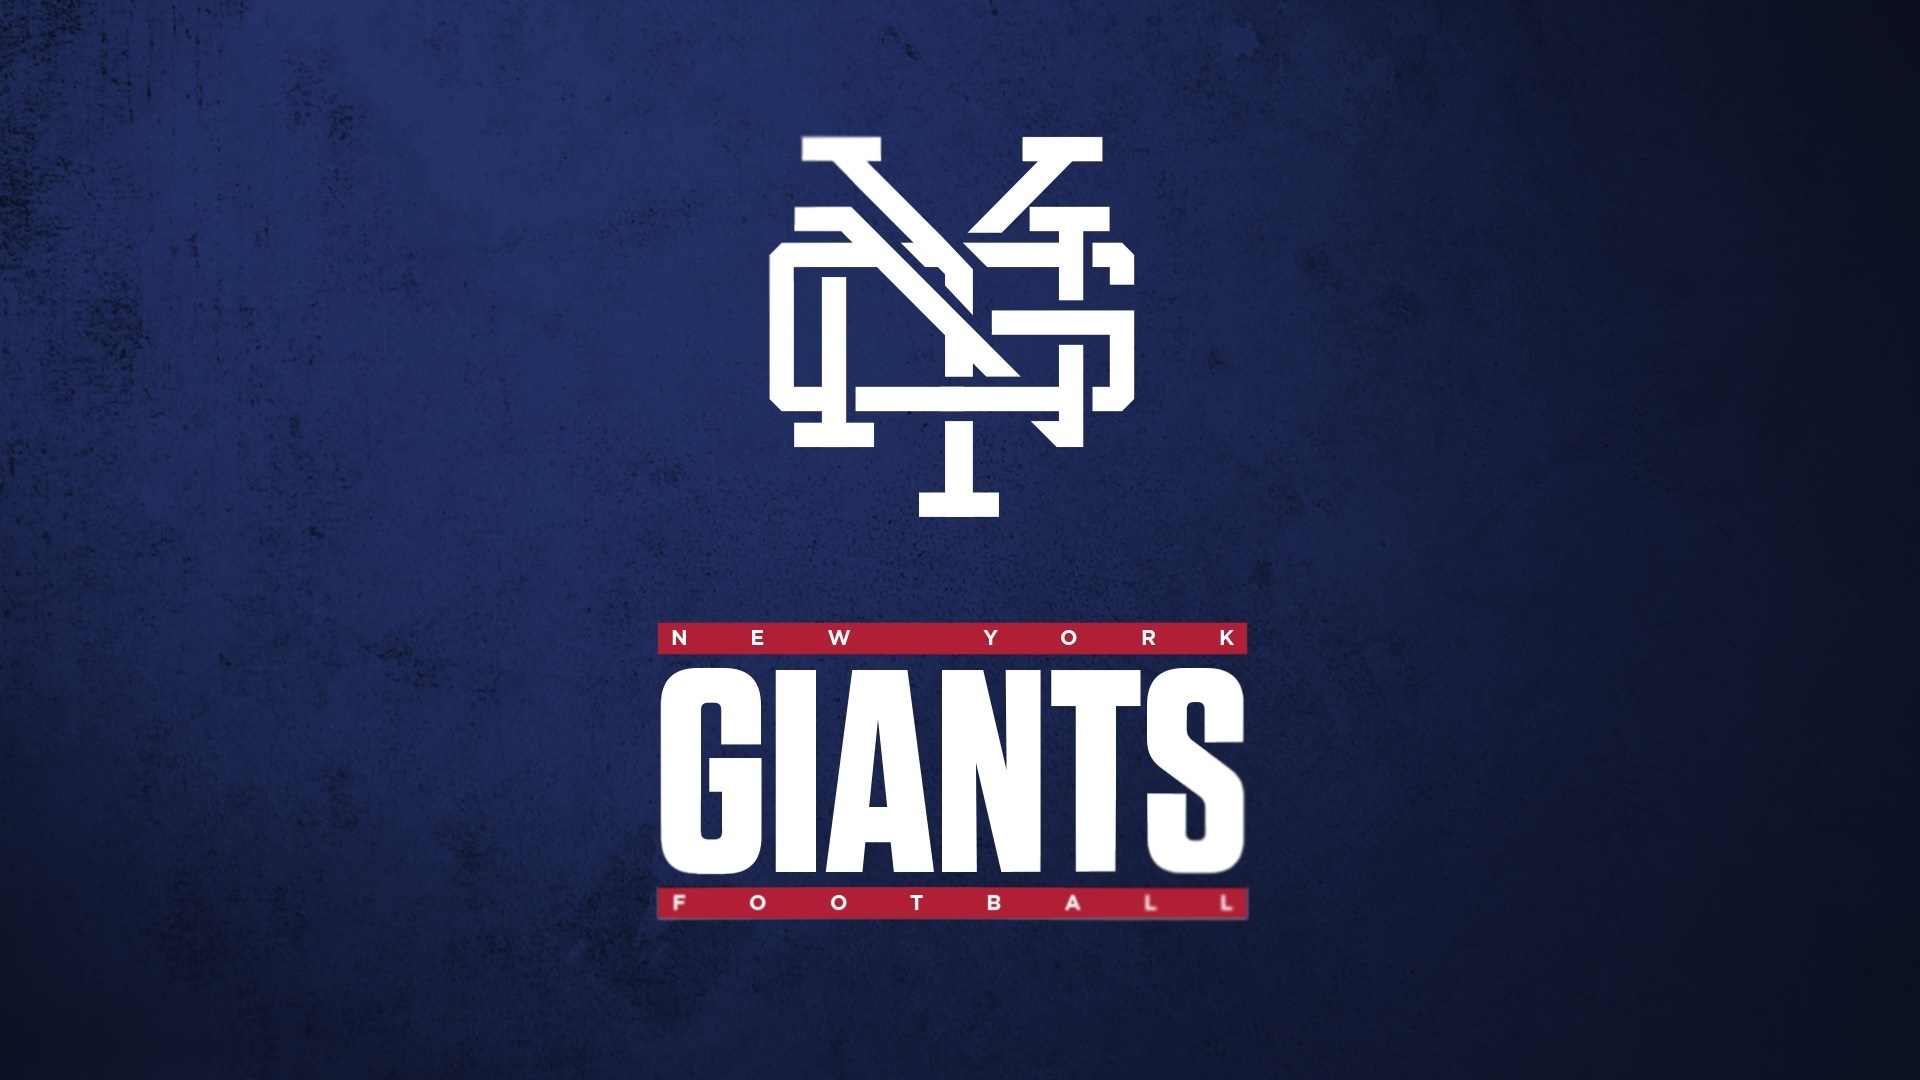 Wallpapers HD New York Giants With high-resolution 1920X1080 pixel. You can use this wallpaper for your Mac or Windows Desktop Background, iPhone, Android or Tablet and another Smartphone device